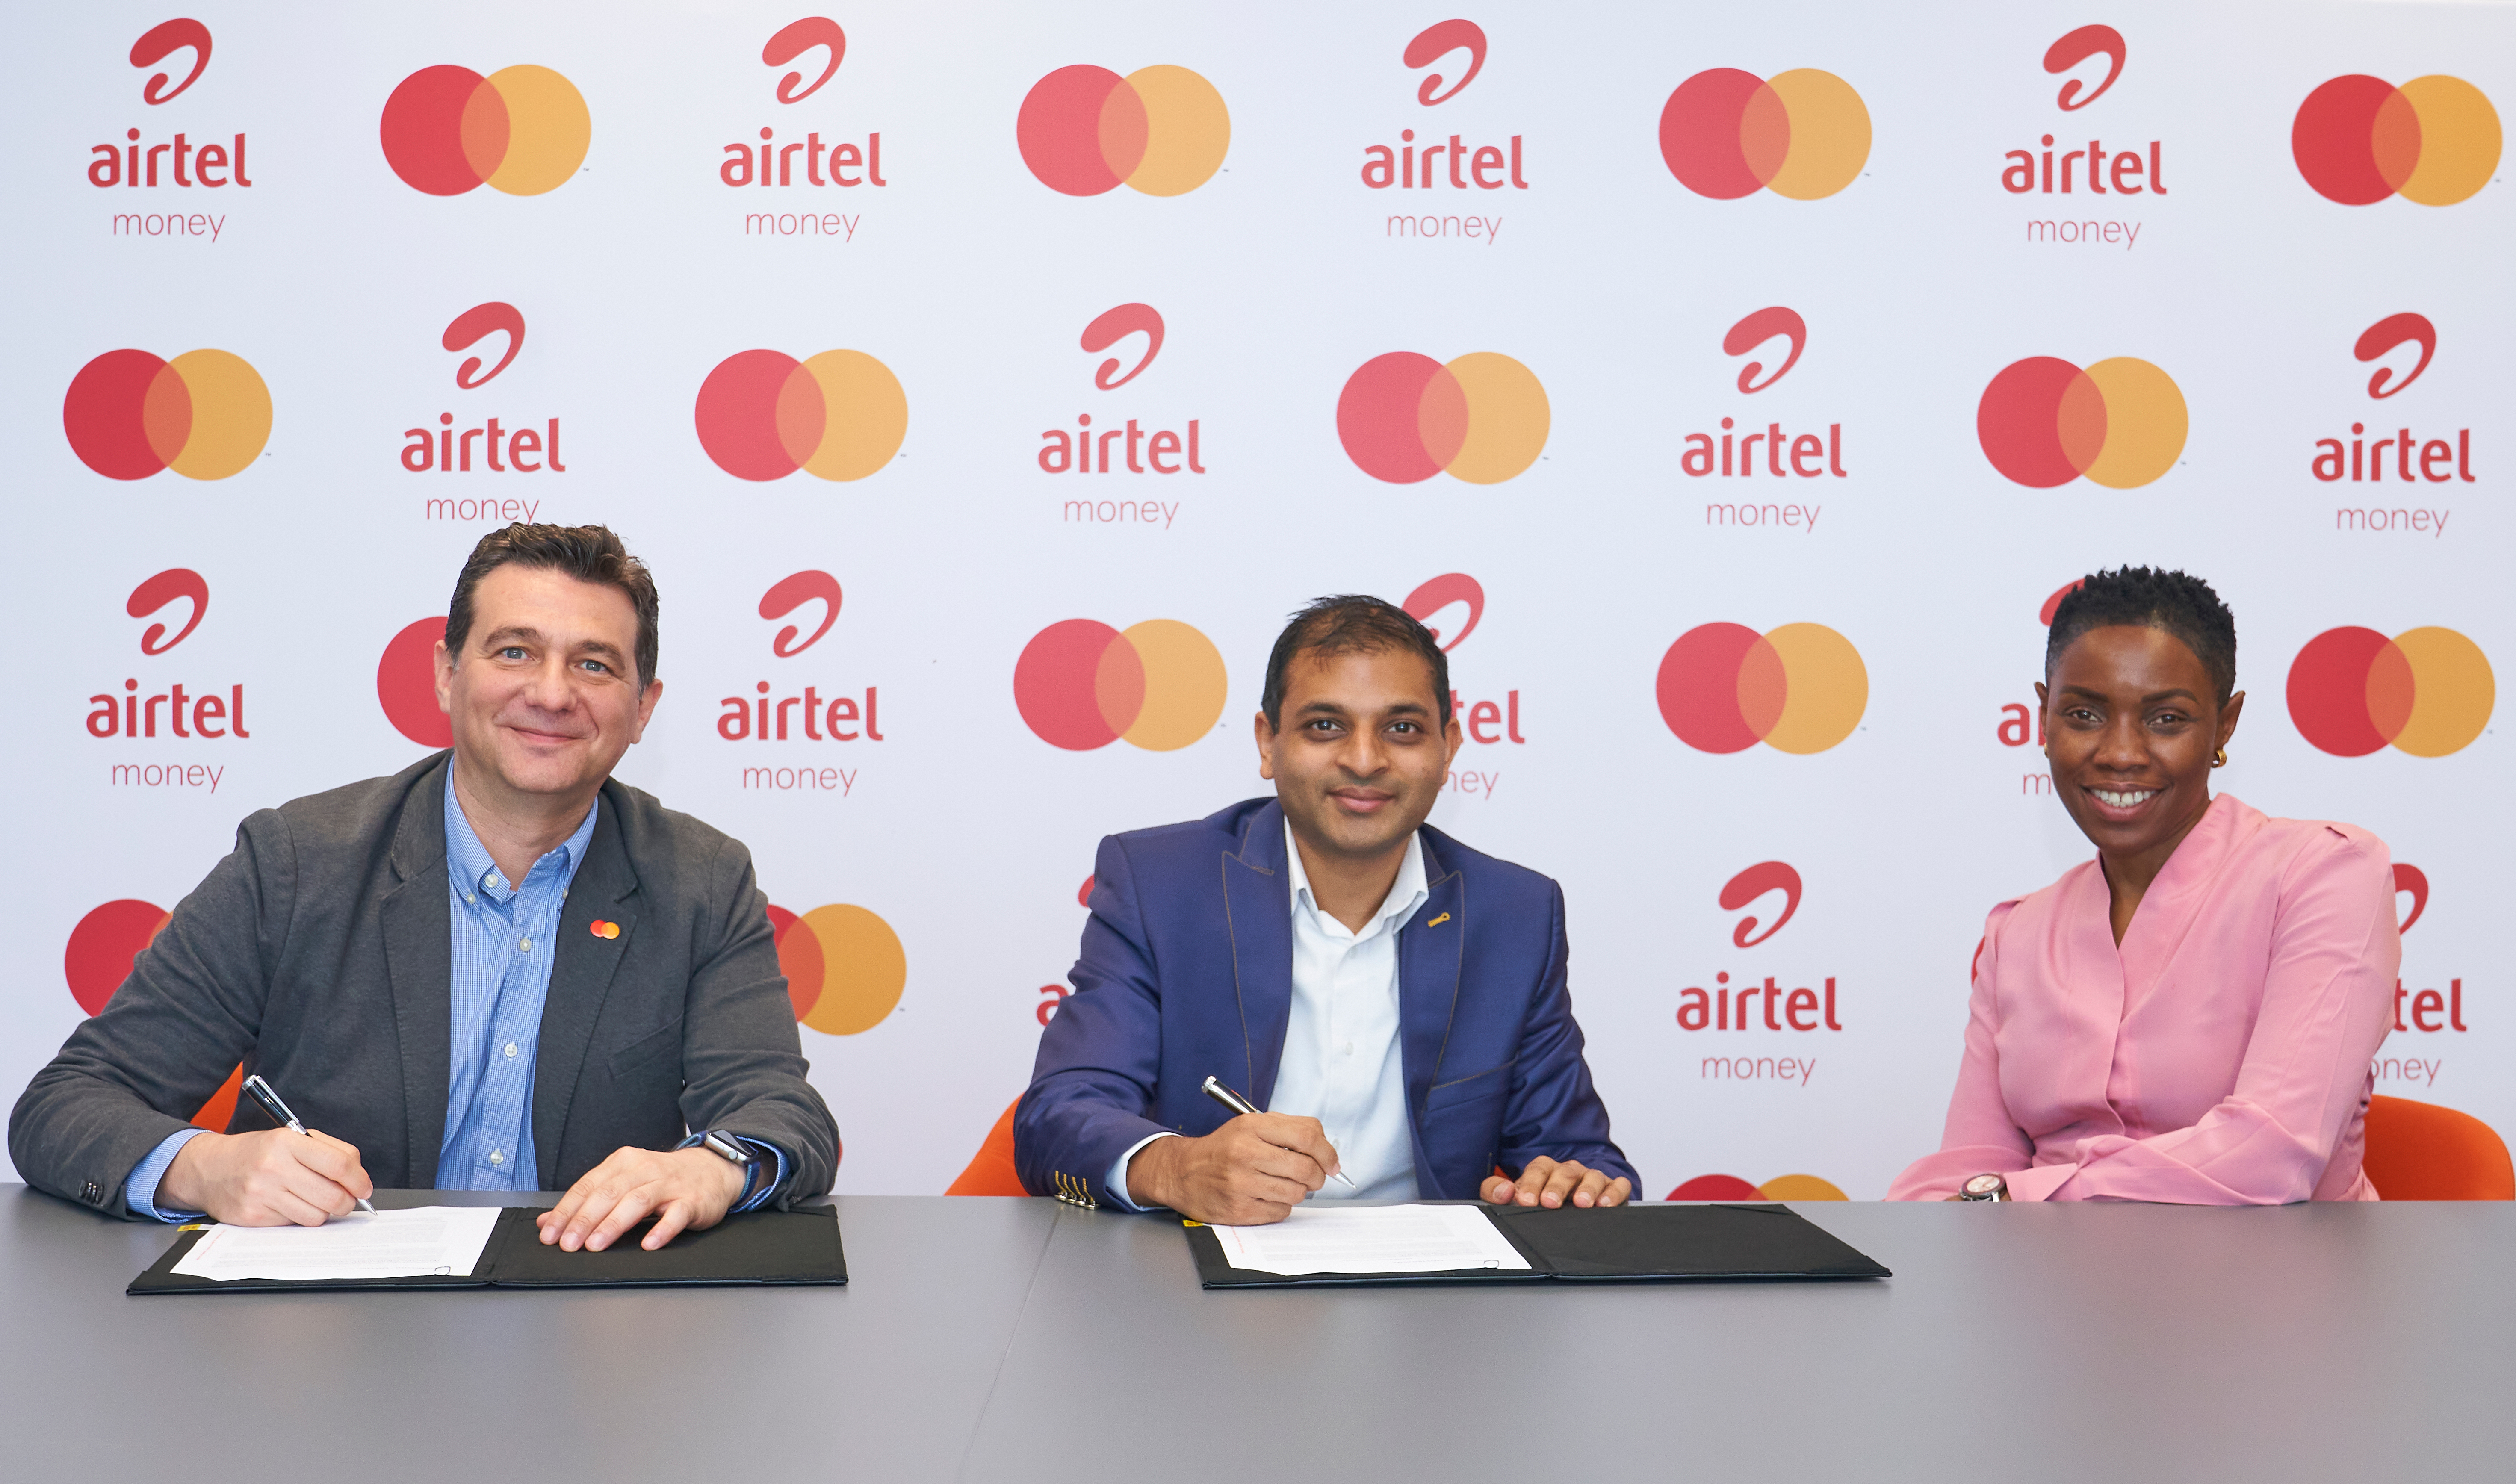 (Left to right): Onur Kursun, Executive Vice President, New Payment Platforms EEMEA Mastercard, Ian Ferrao Chief Executive Officer, Airtel Money Africa and Ngozi Megwa, Senior Vice President, Digital Partnerships EEMEA Mastercard during the launch of a new cross-border remittance service that will enable Airtel customers in 14 African countries to send money to and receive funds from wallets in over 145 markets across the world. Airtel will leverage Mastercard’s global network and digital payments capabilities to deliver a first-class experience for over 100 million Airtel Africa mobile phone users looking for access to fast and secure money transfers.